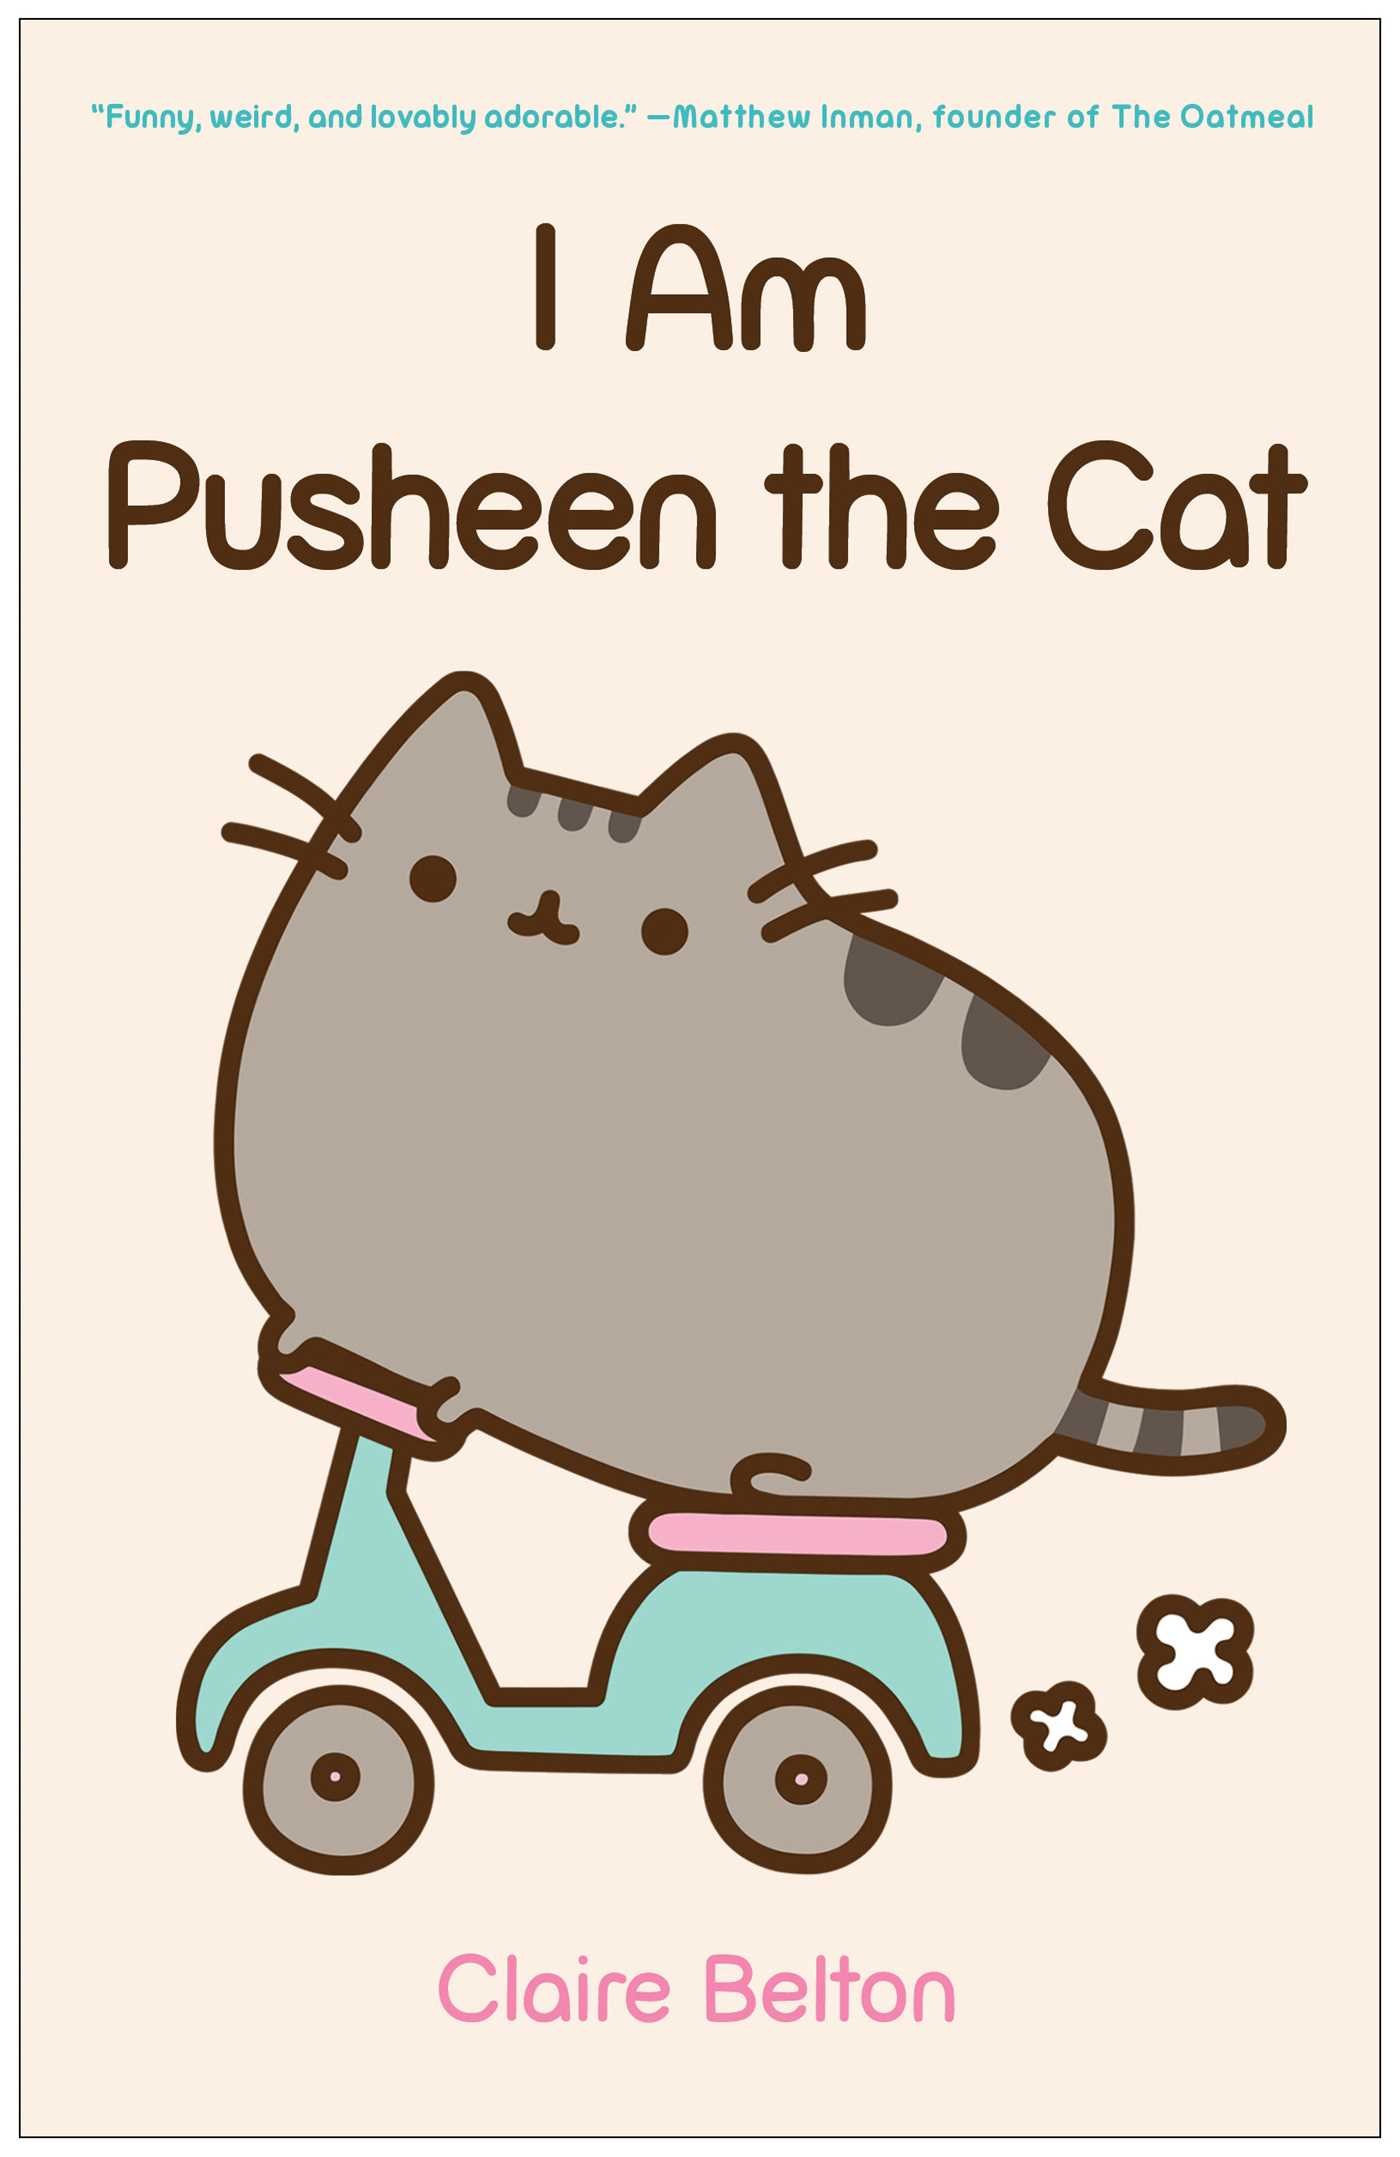 I Am Pusheen the Cat (A Pusheen Book) (Kindle eBook) by Claire Belton $2.99